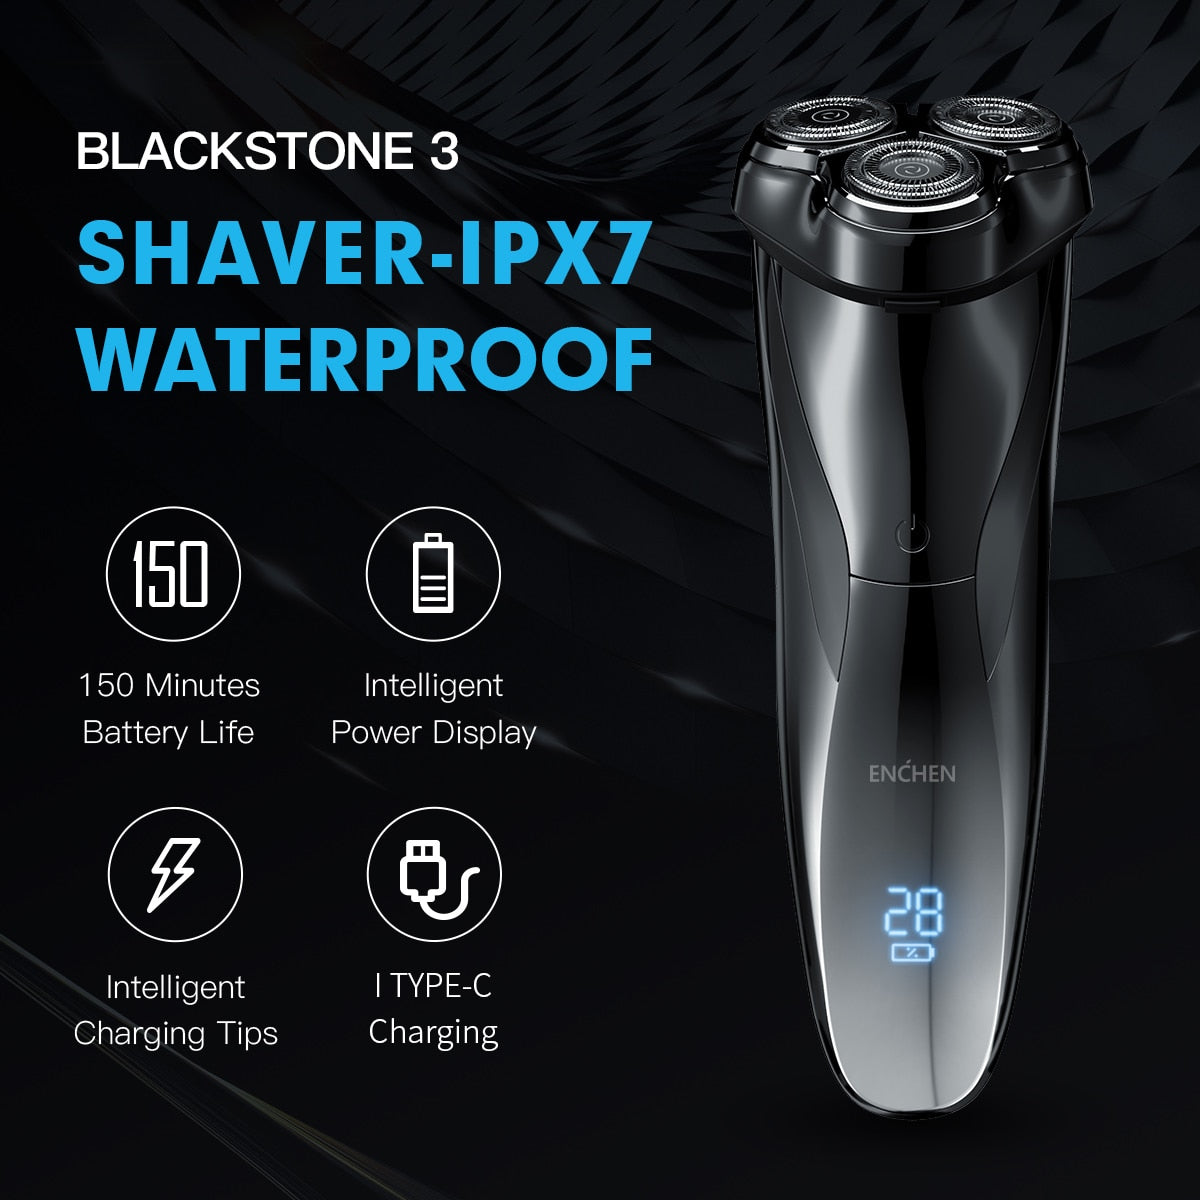 ENCHEN Electric Shaver 3D Blackstone 3 IPX7 Waterproof Razor Wet And Dry Dual Use Face Beard Battery Digital Display For Men